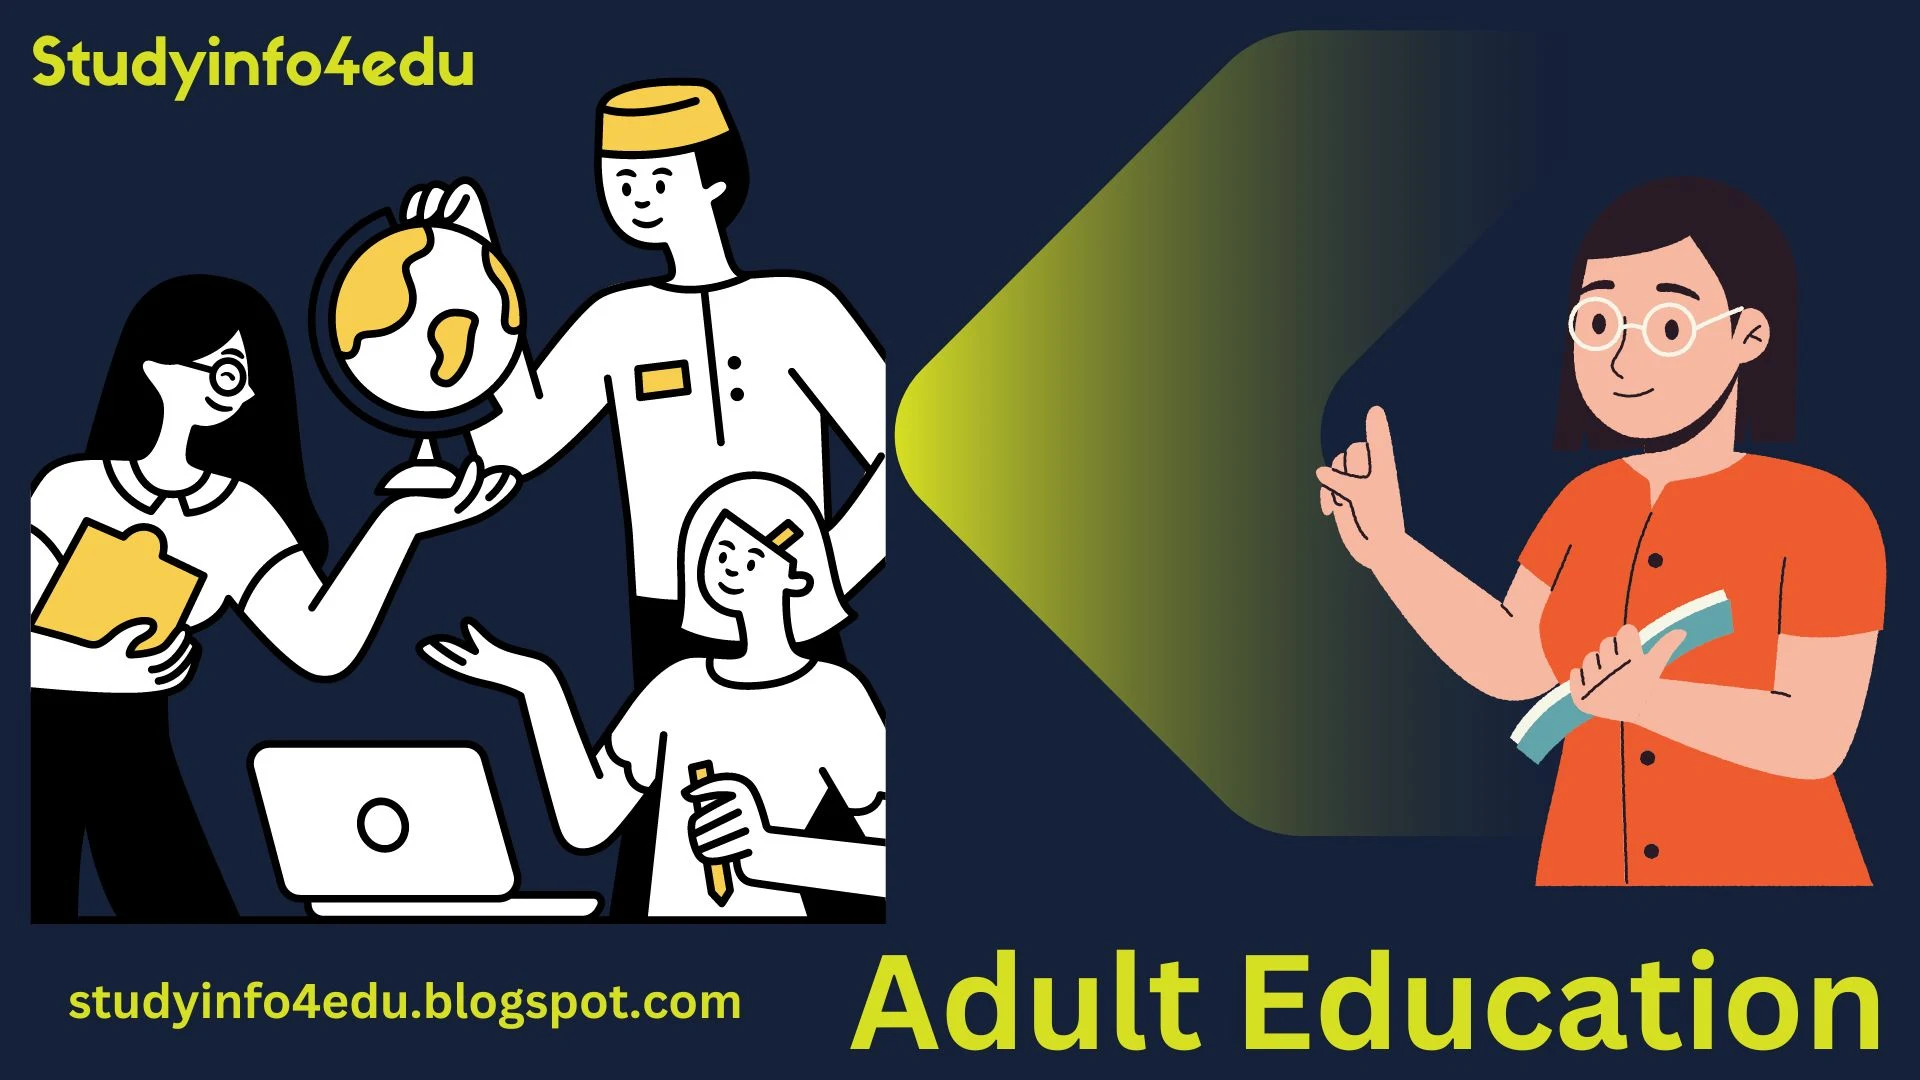 What is Adult Education?